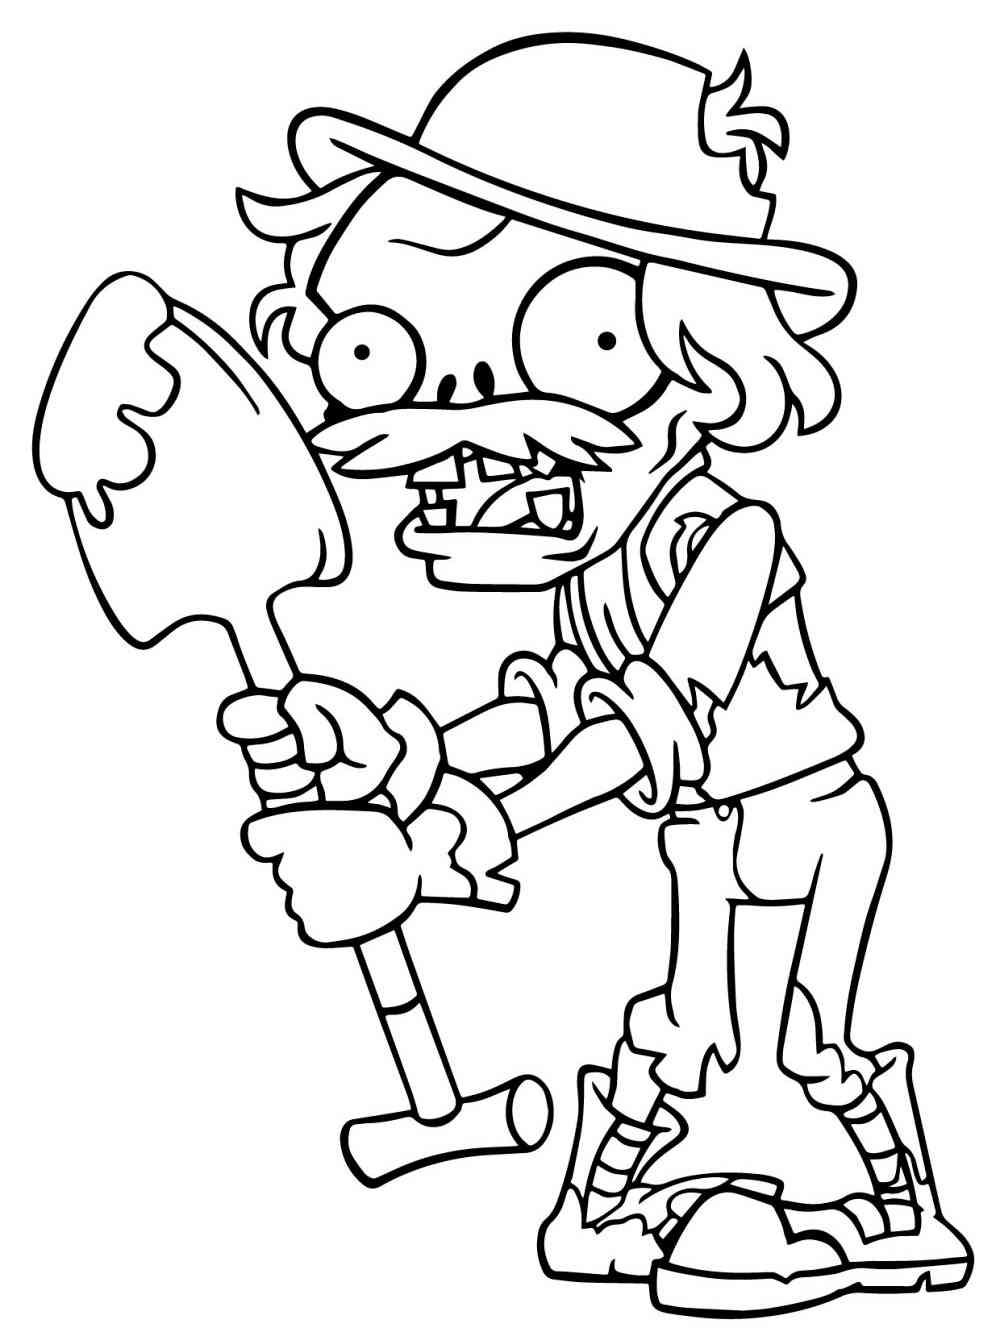 Excavator Zombie from Plants vs. Zombies coloring page